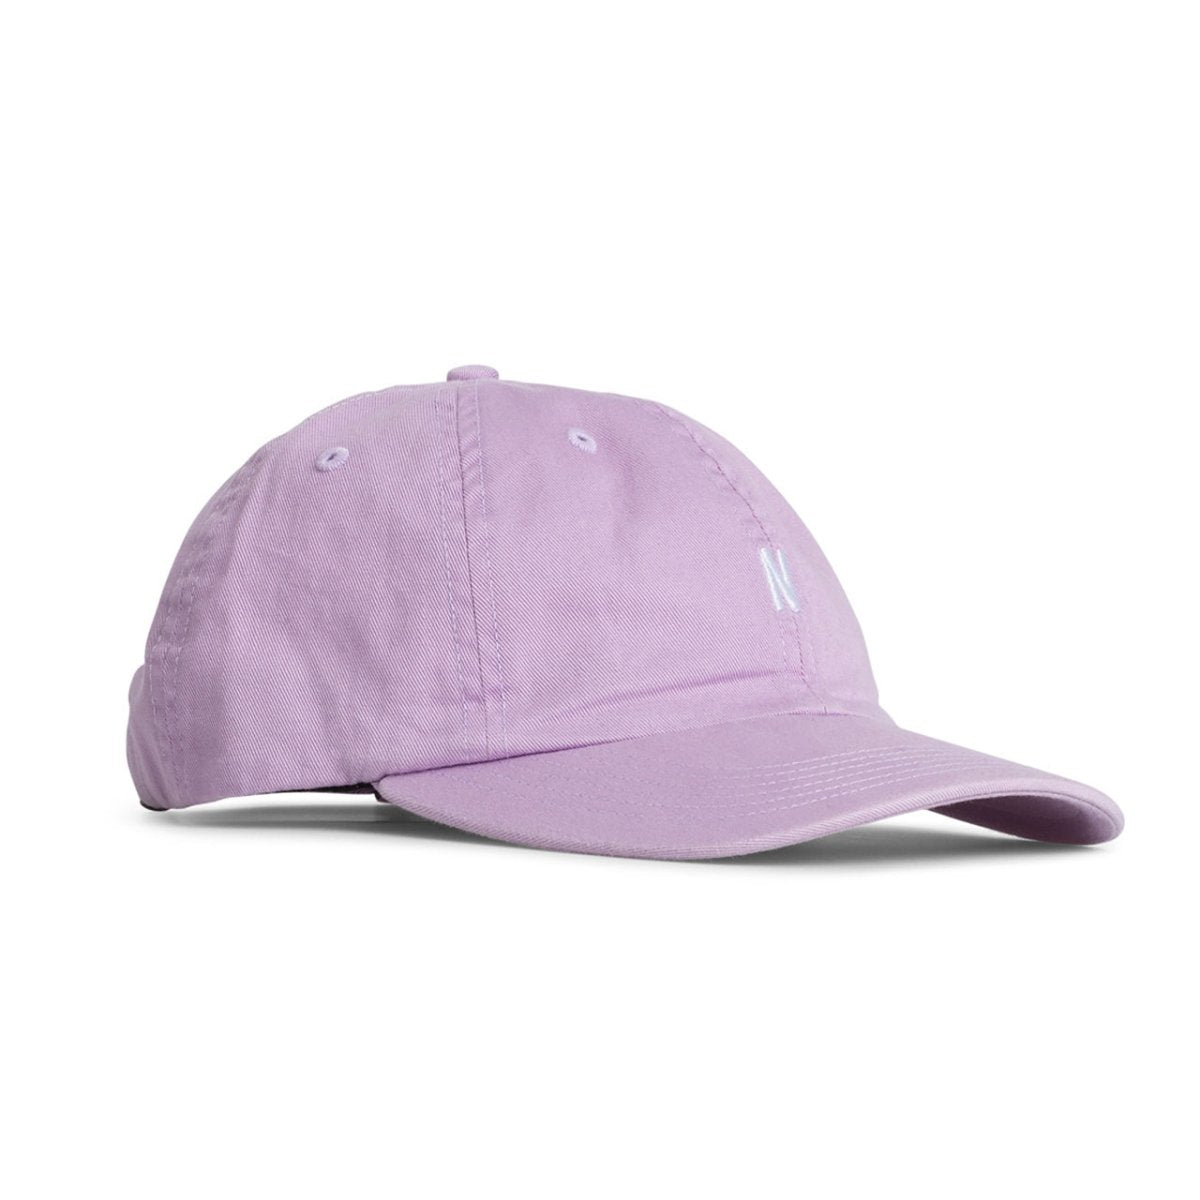 Norse Projects Light Twill Sports Cap (Heather)  - Allike Store